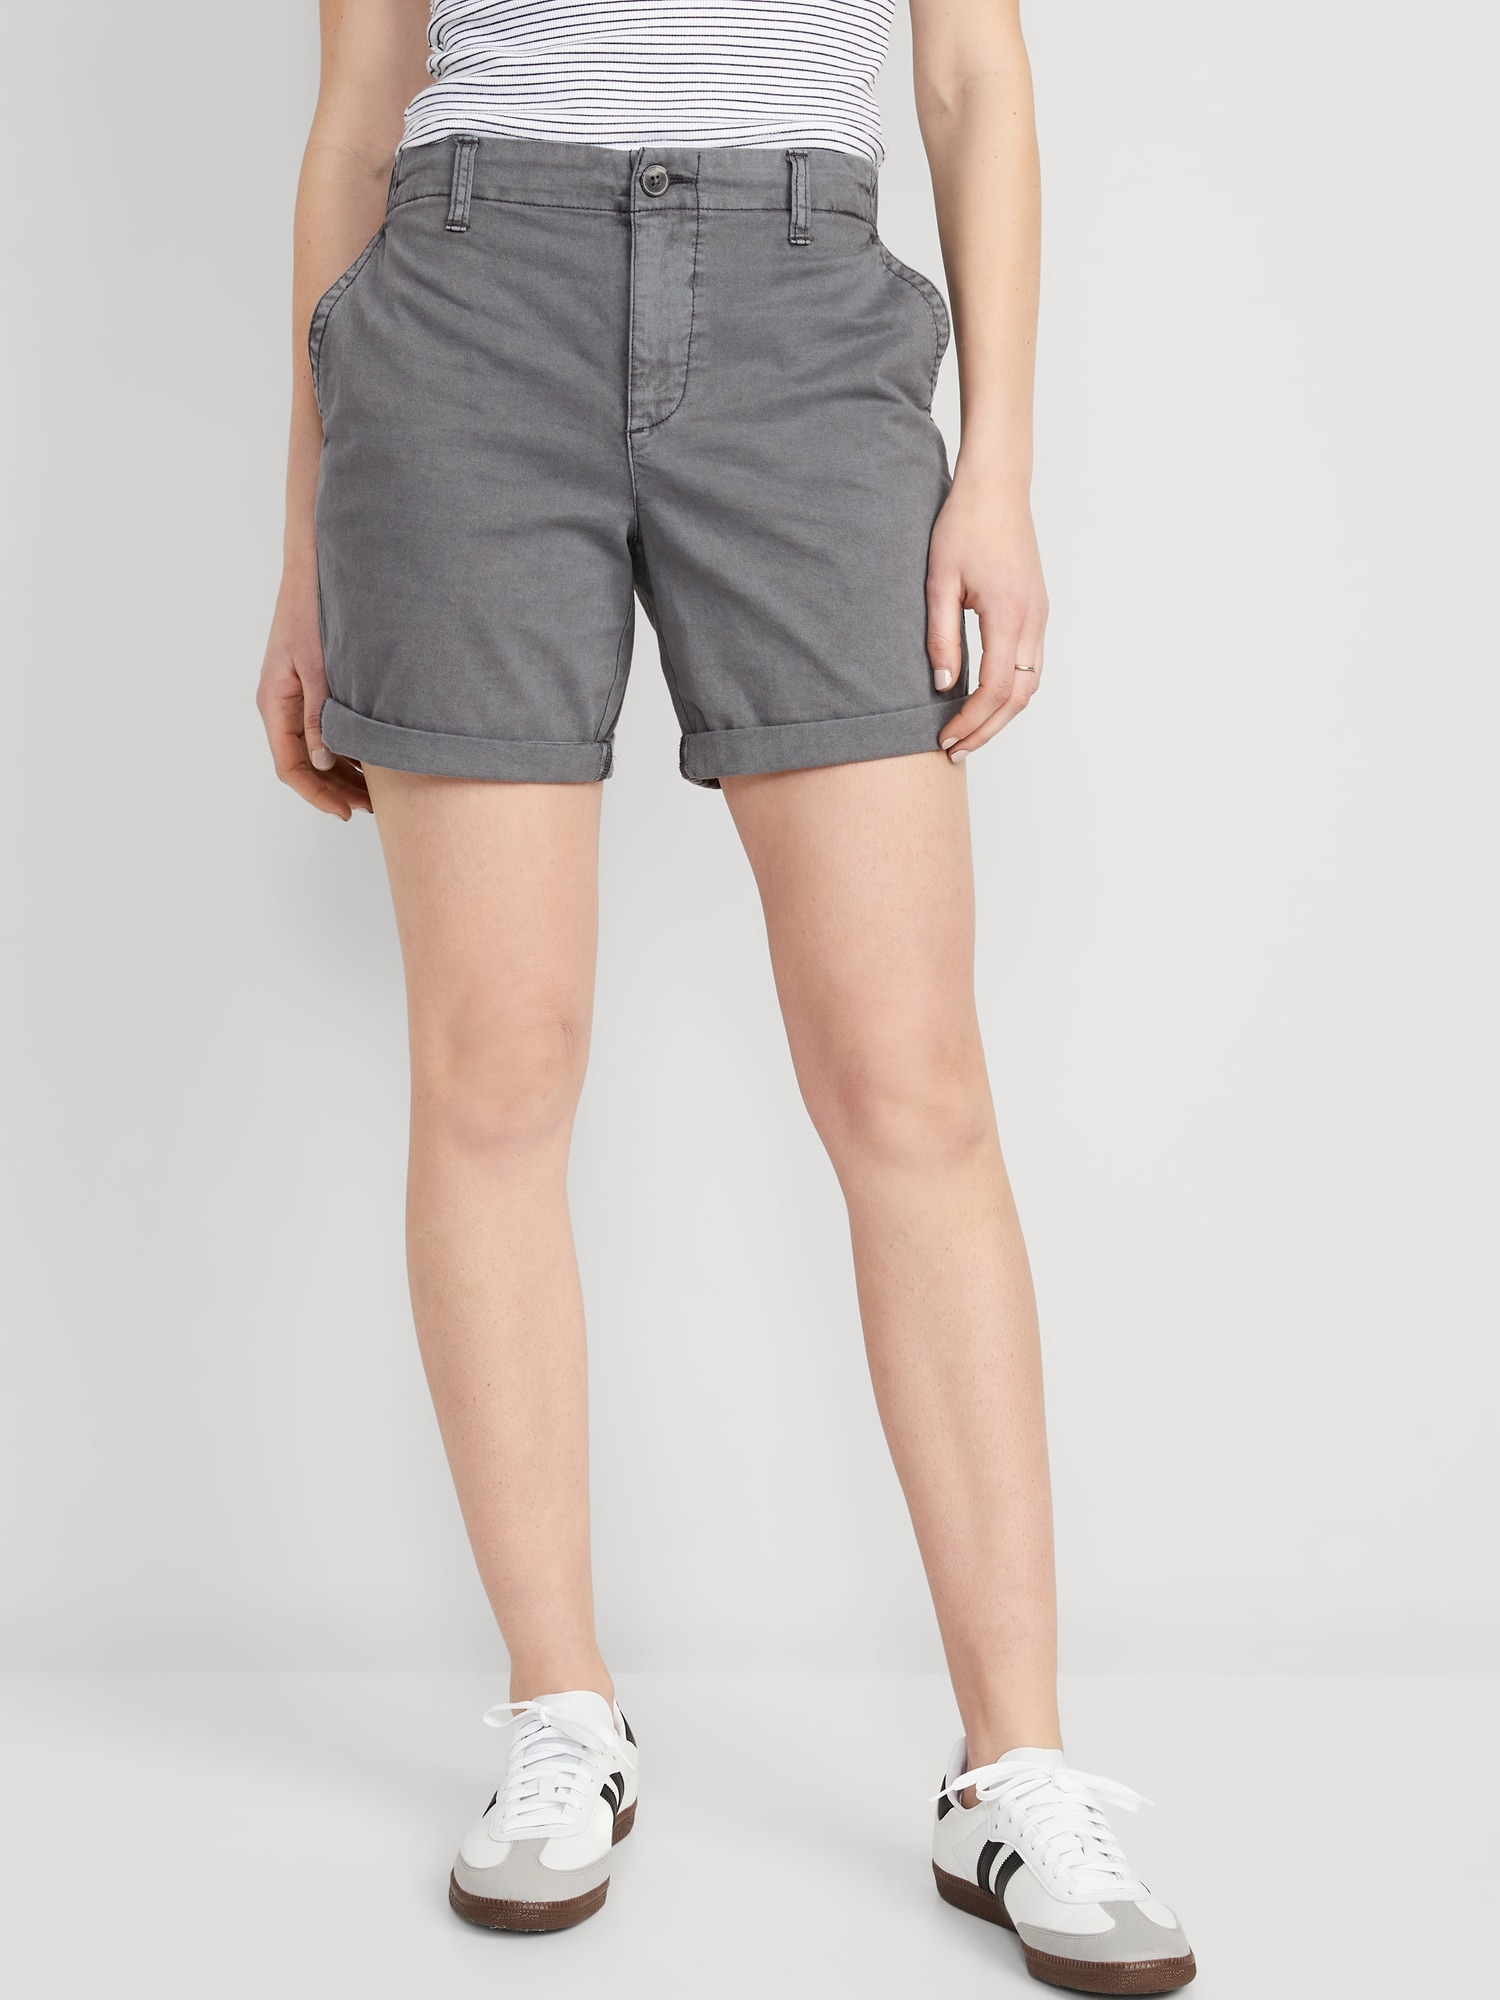 Buy Old Navy High-Waisted OGC Chino Shorts for Women - 5-inch